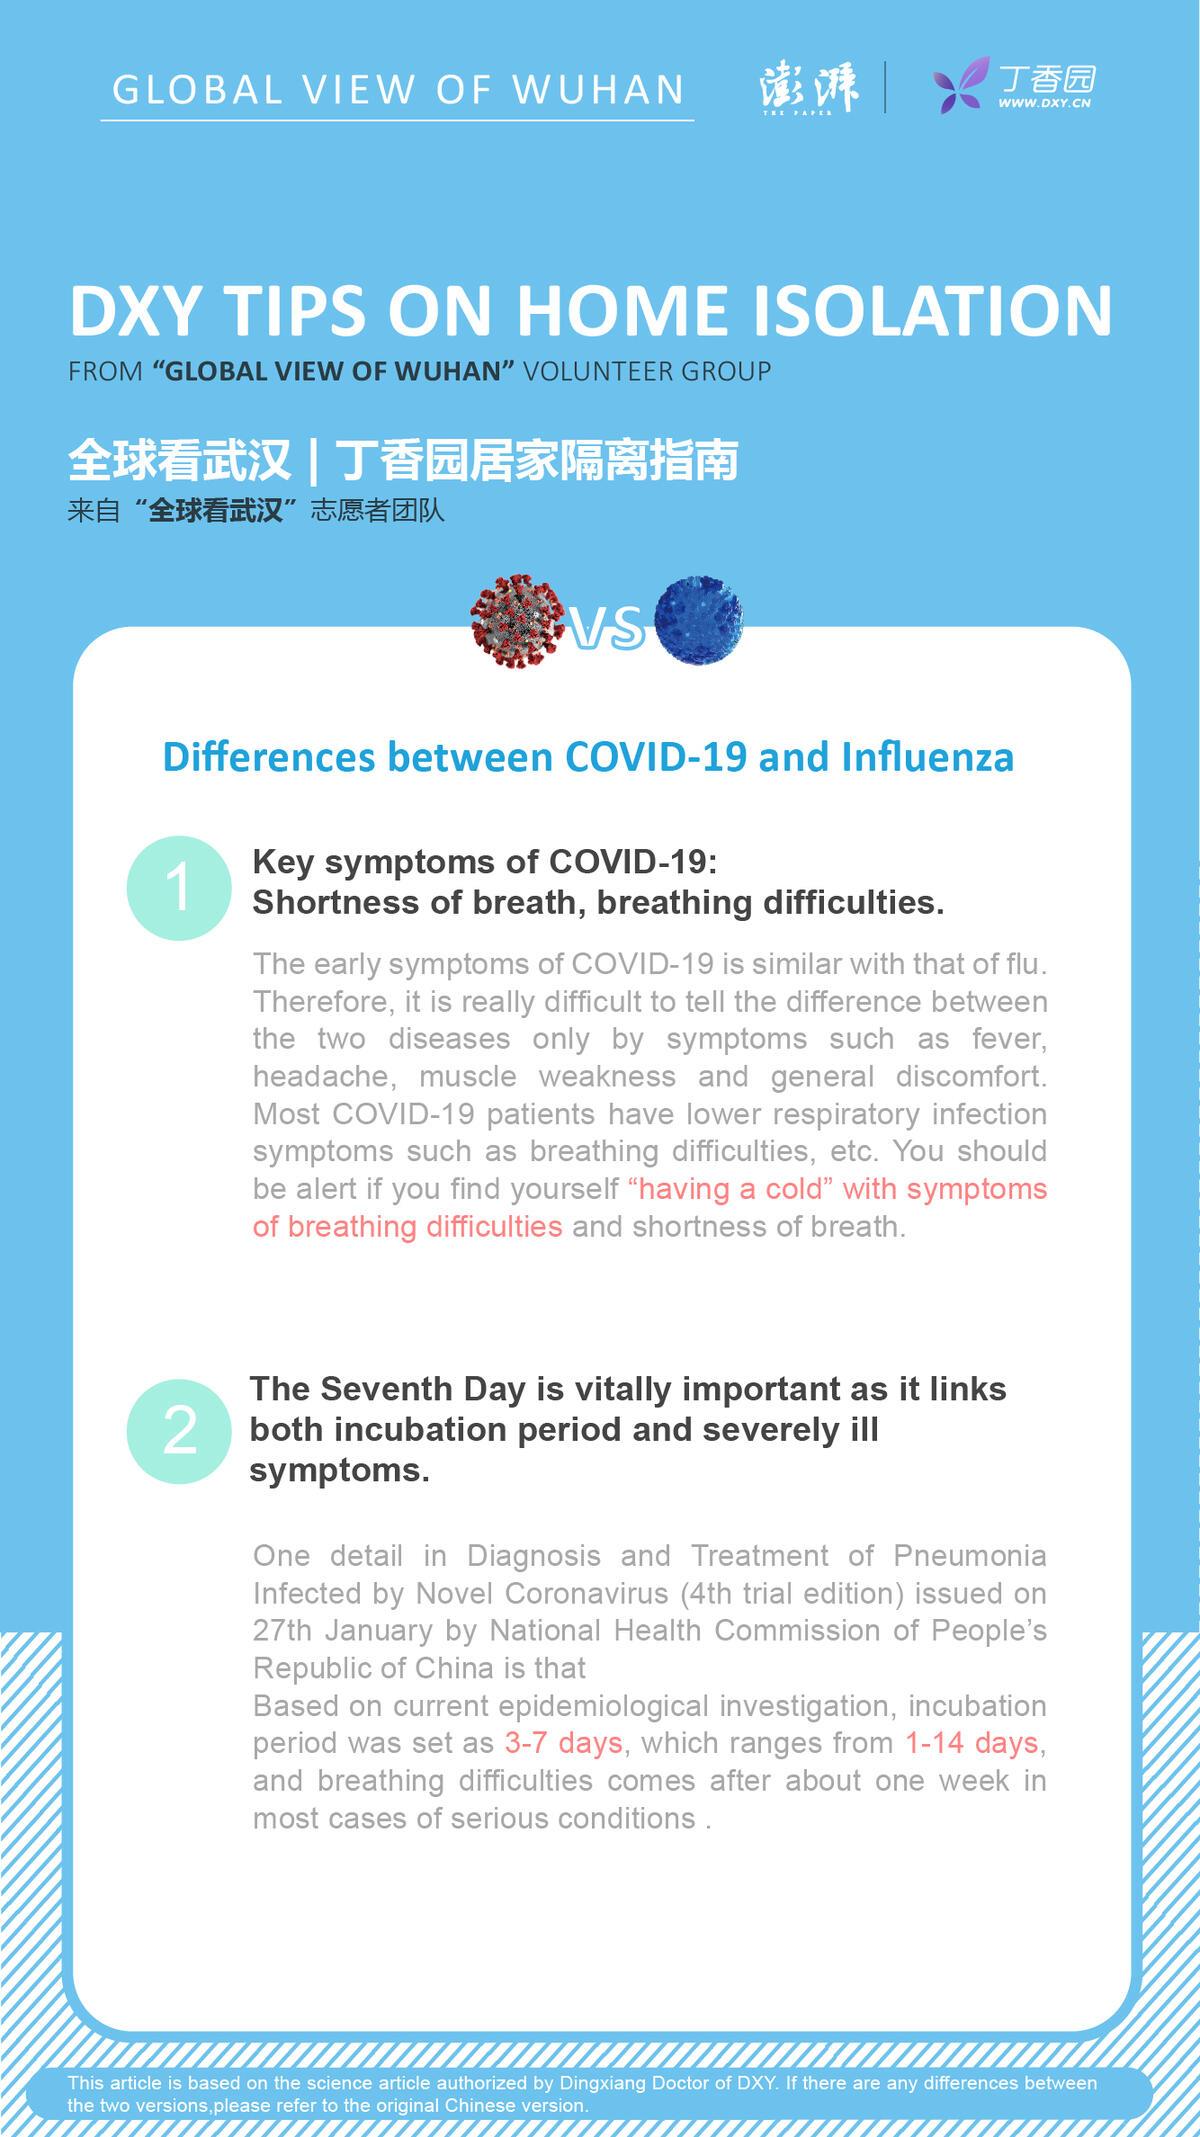  Differences between COVID-19 and Influenza